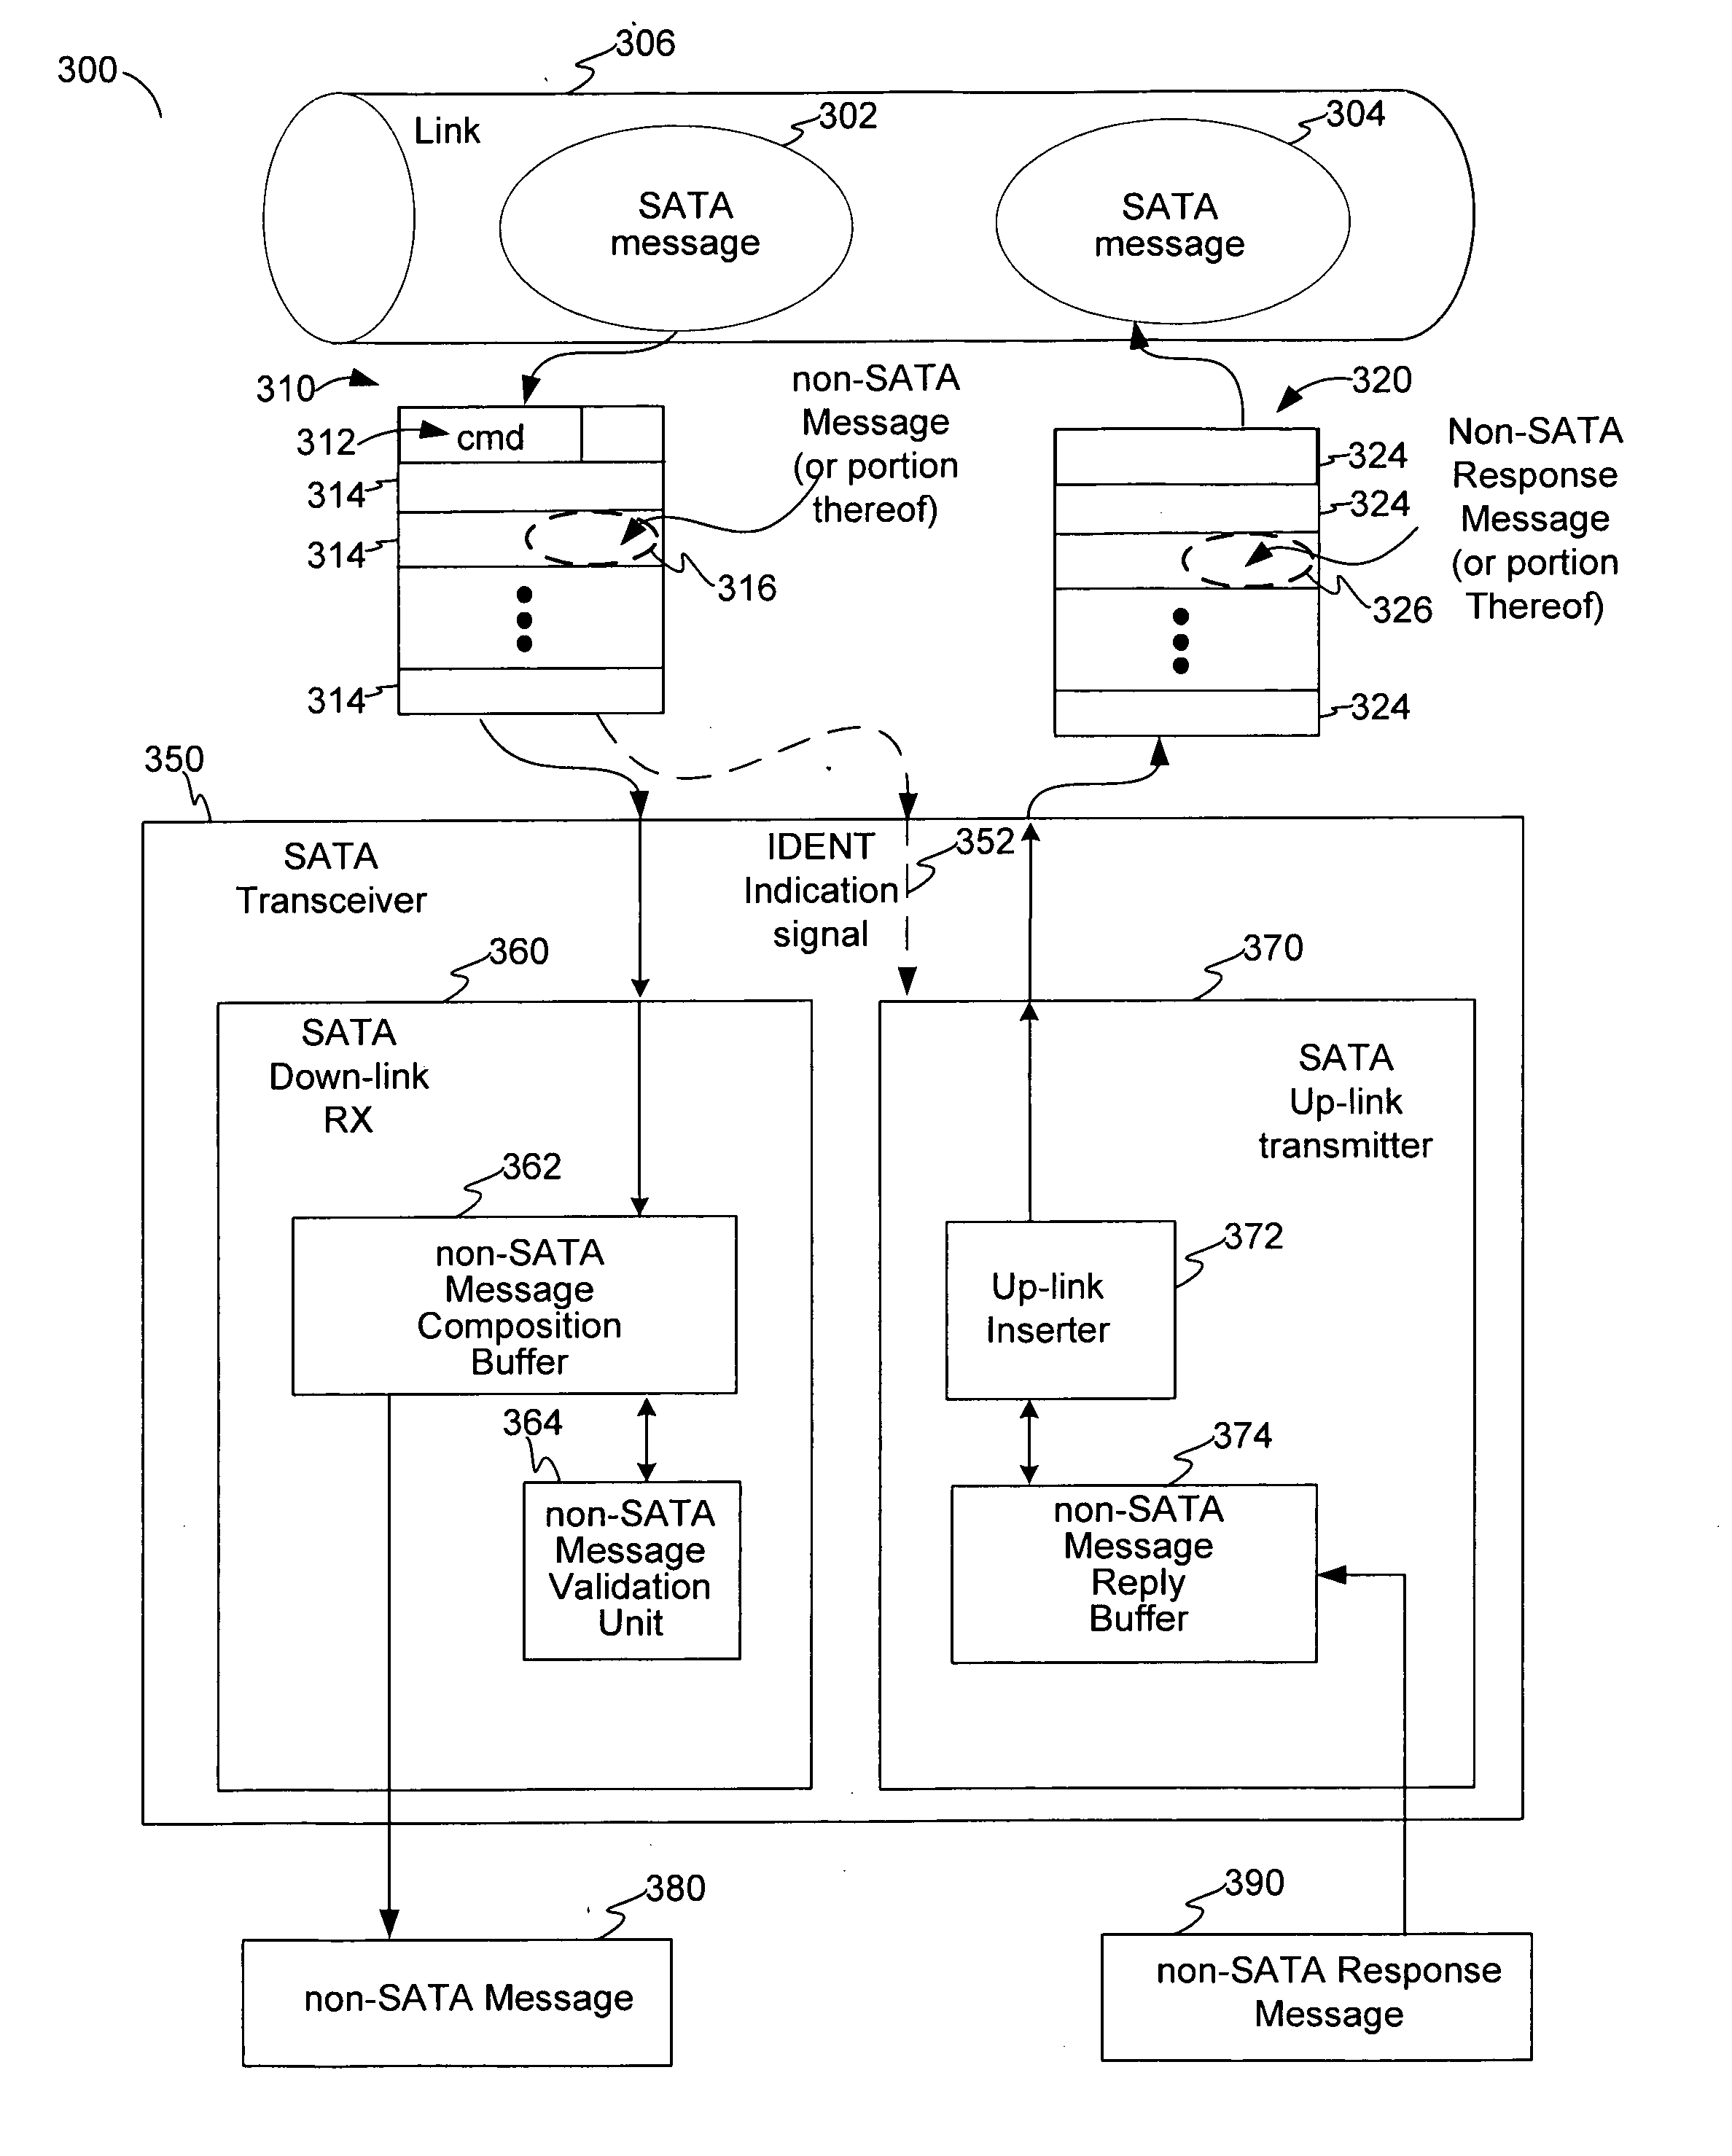 Covert channel for conveying supplemental messages in a protocol-defined link for a system of storage devices